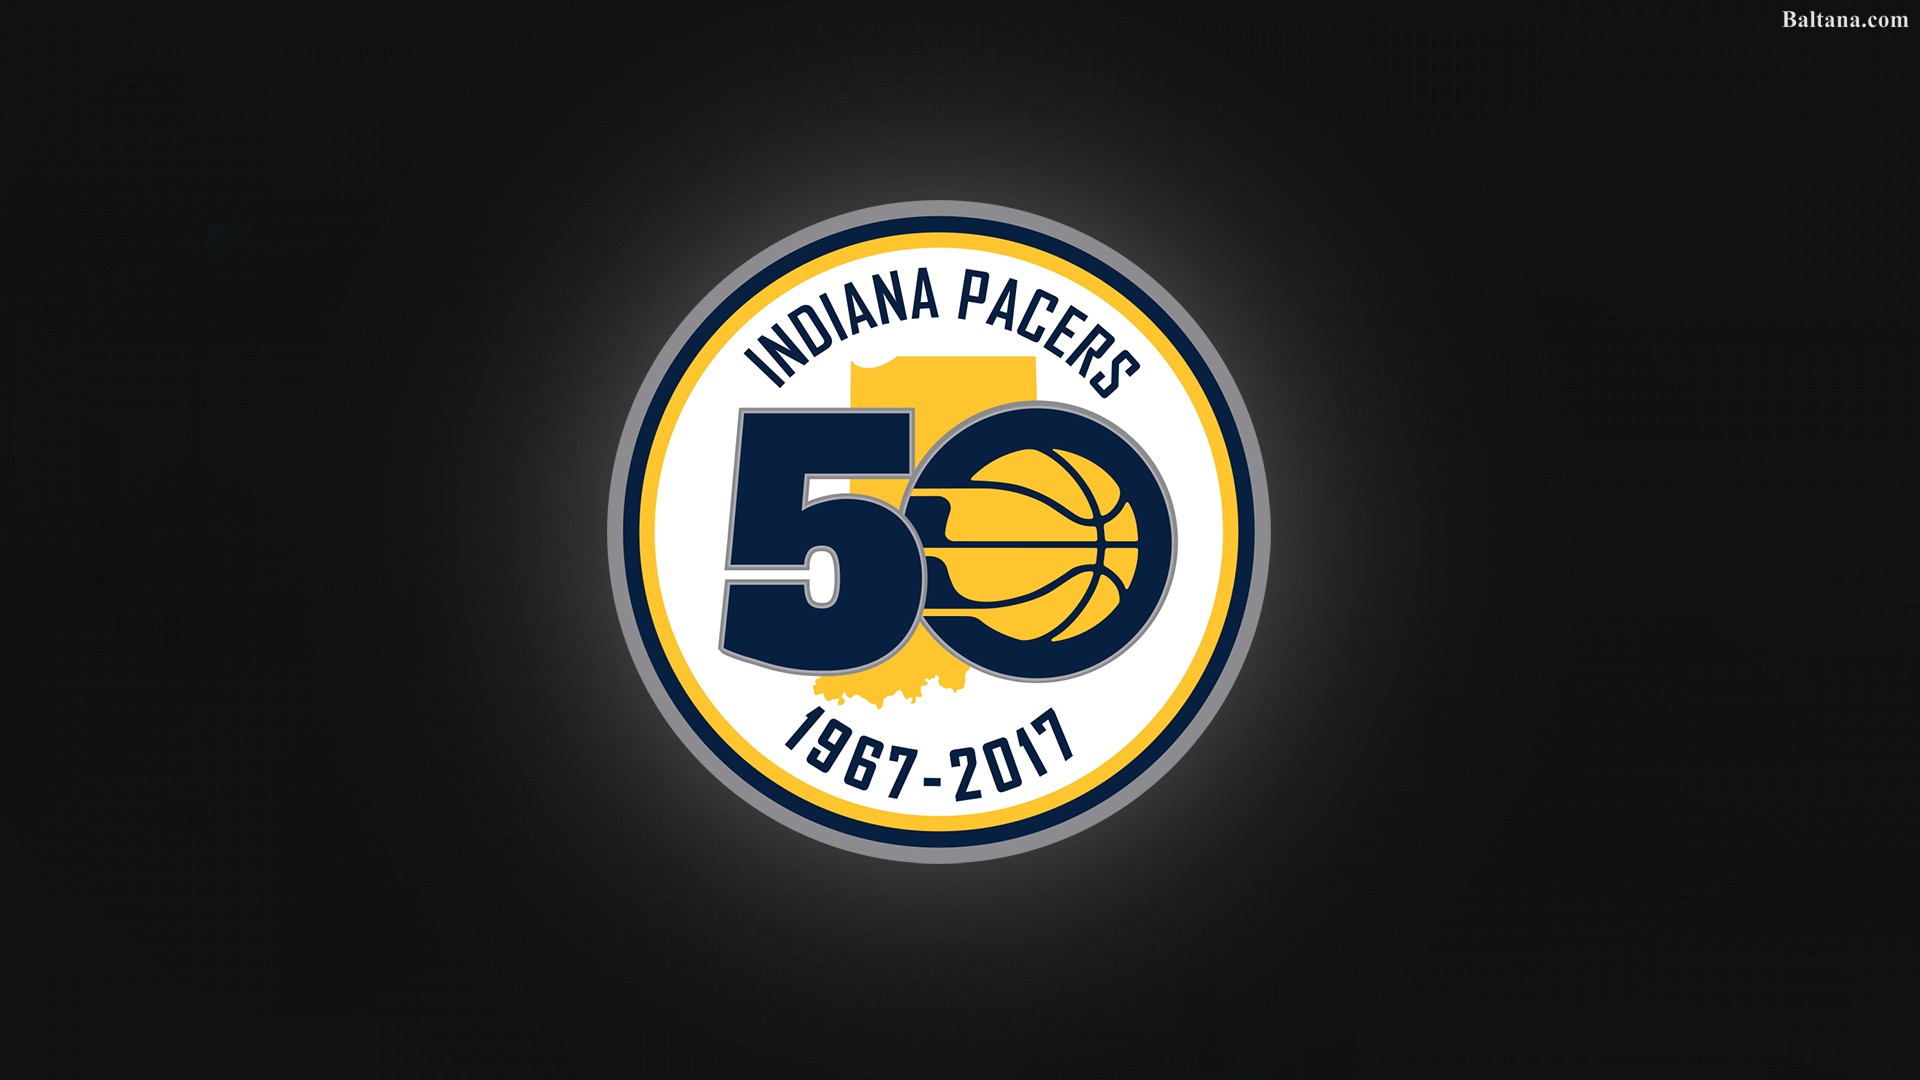 Indiana Pacers Hd Desktop Wallpaper - Indiana Pacers - HD Wallpaper 